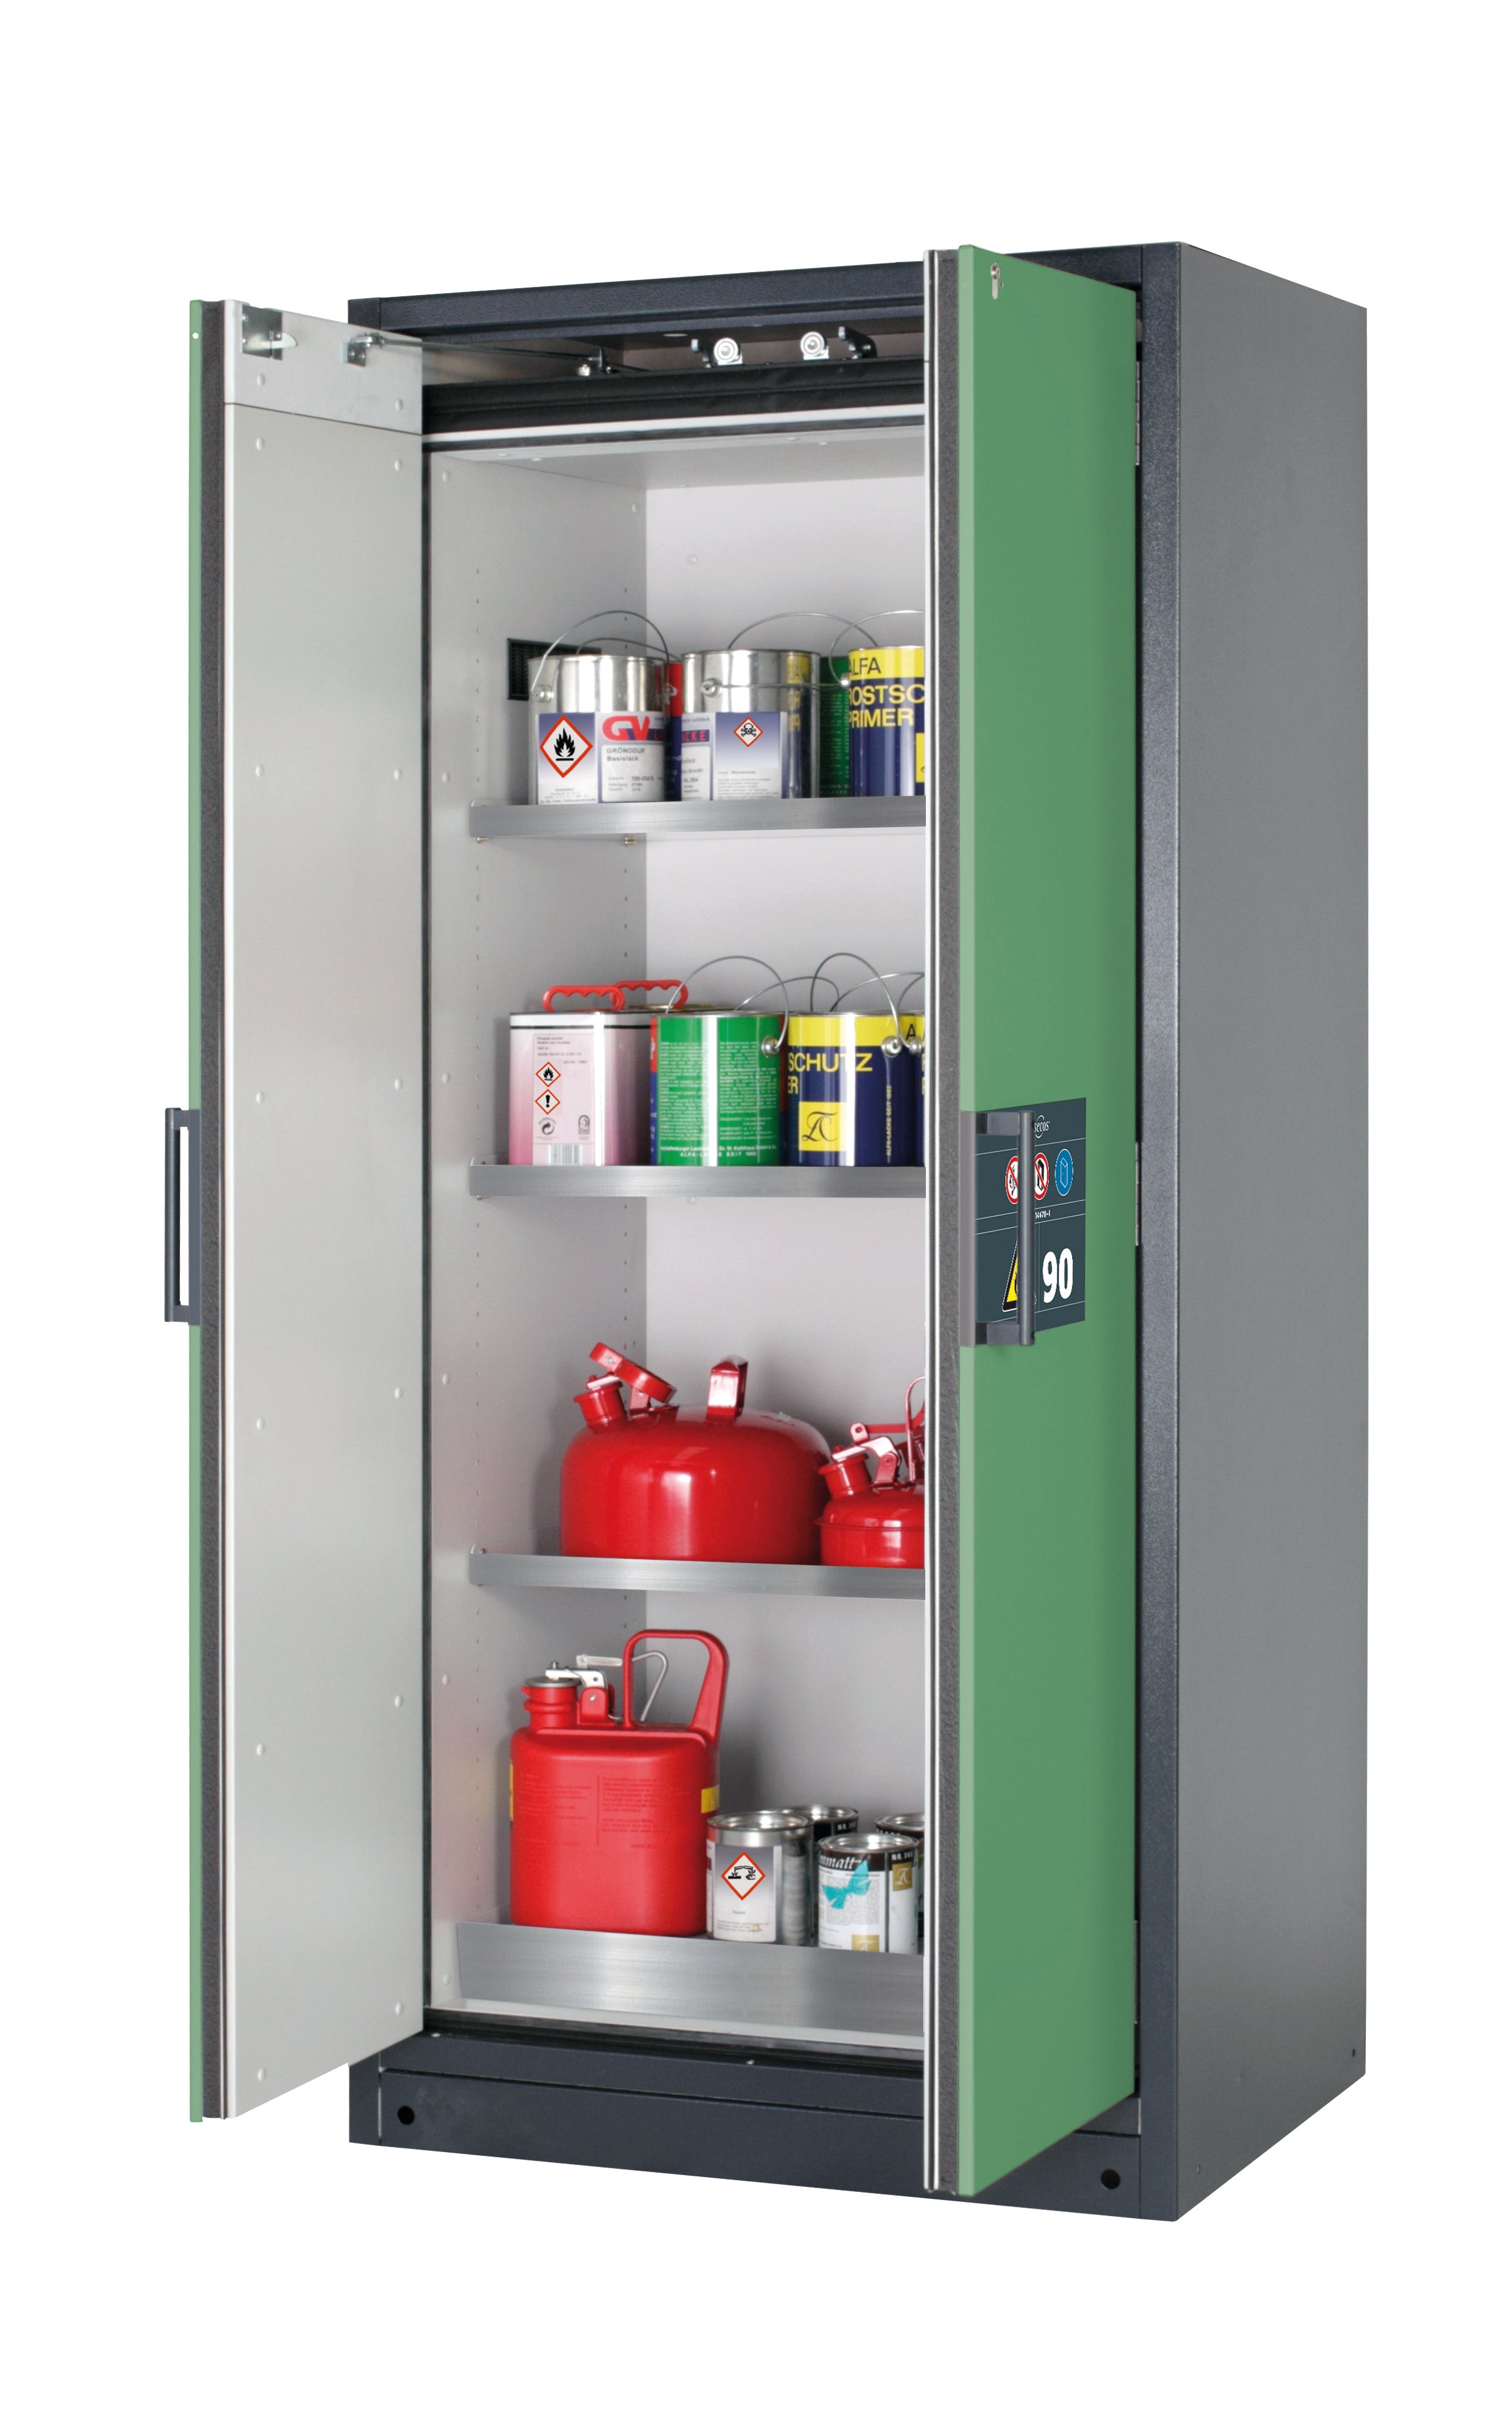 Type 90 safety storage cabinet Q-CLASSIC-90 model Q90.195.090 in reseda green RAL 6011 with 3x shelf standard (stainless steel 1.4301),